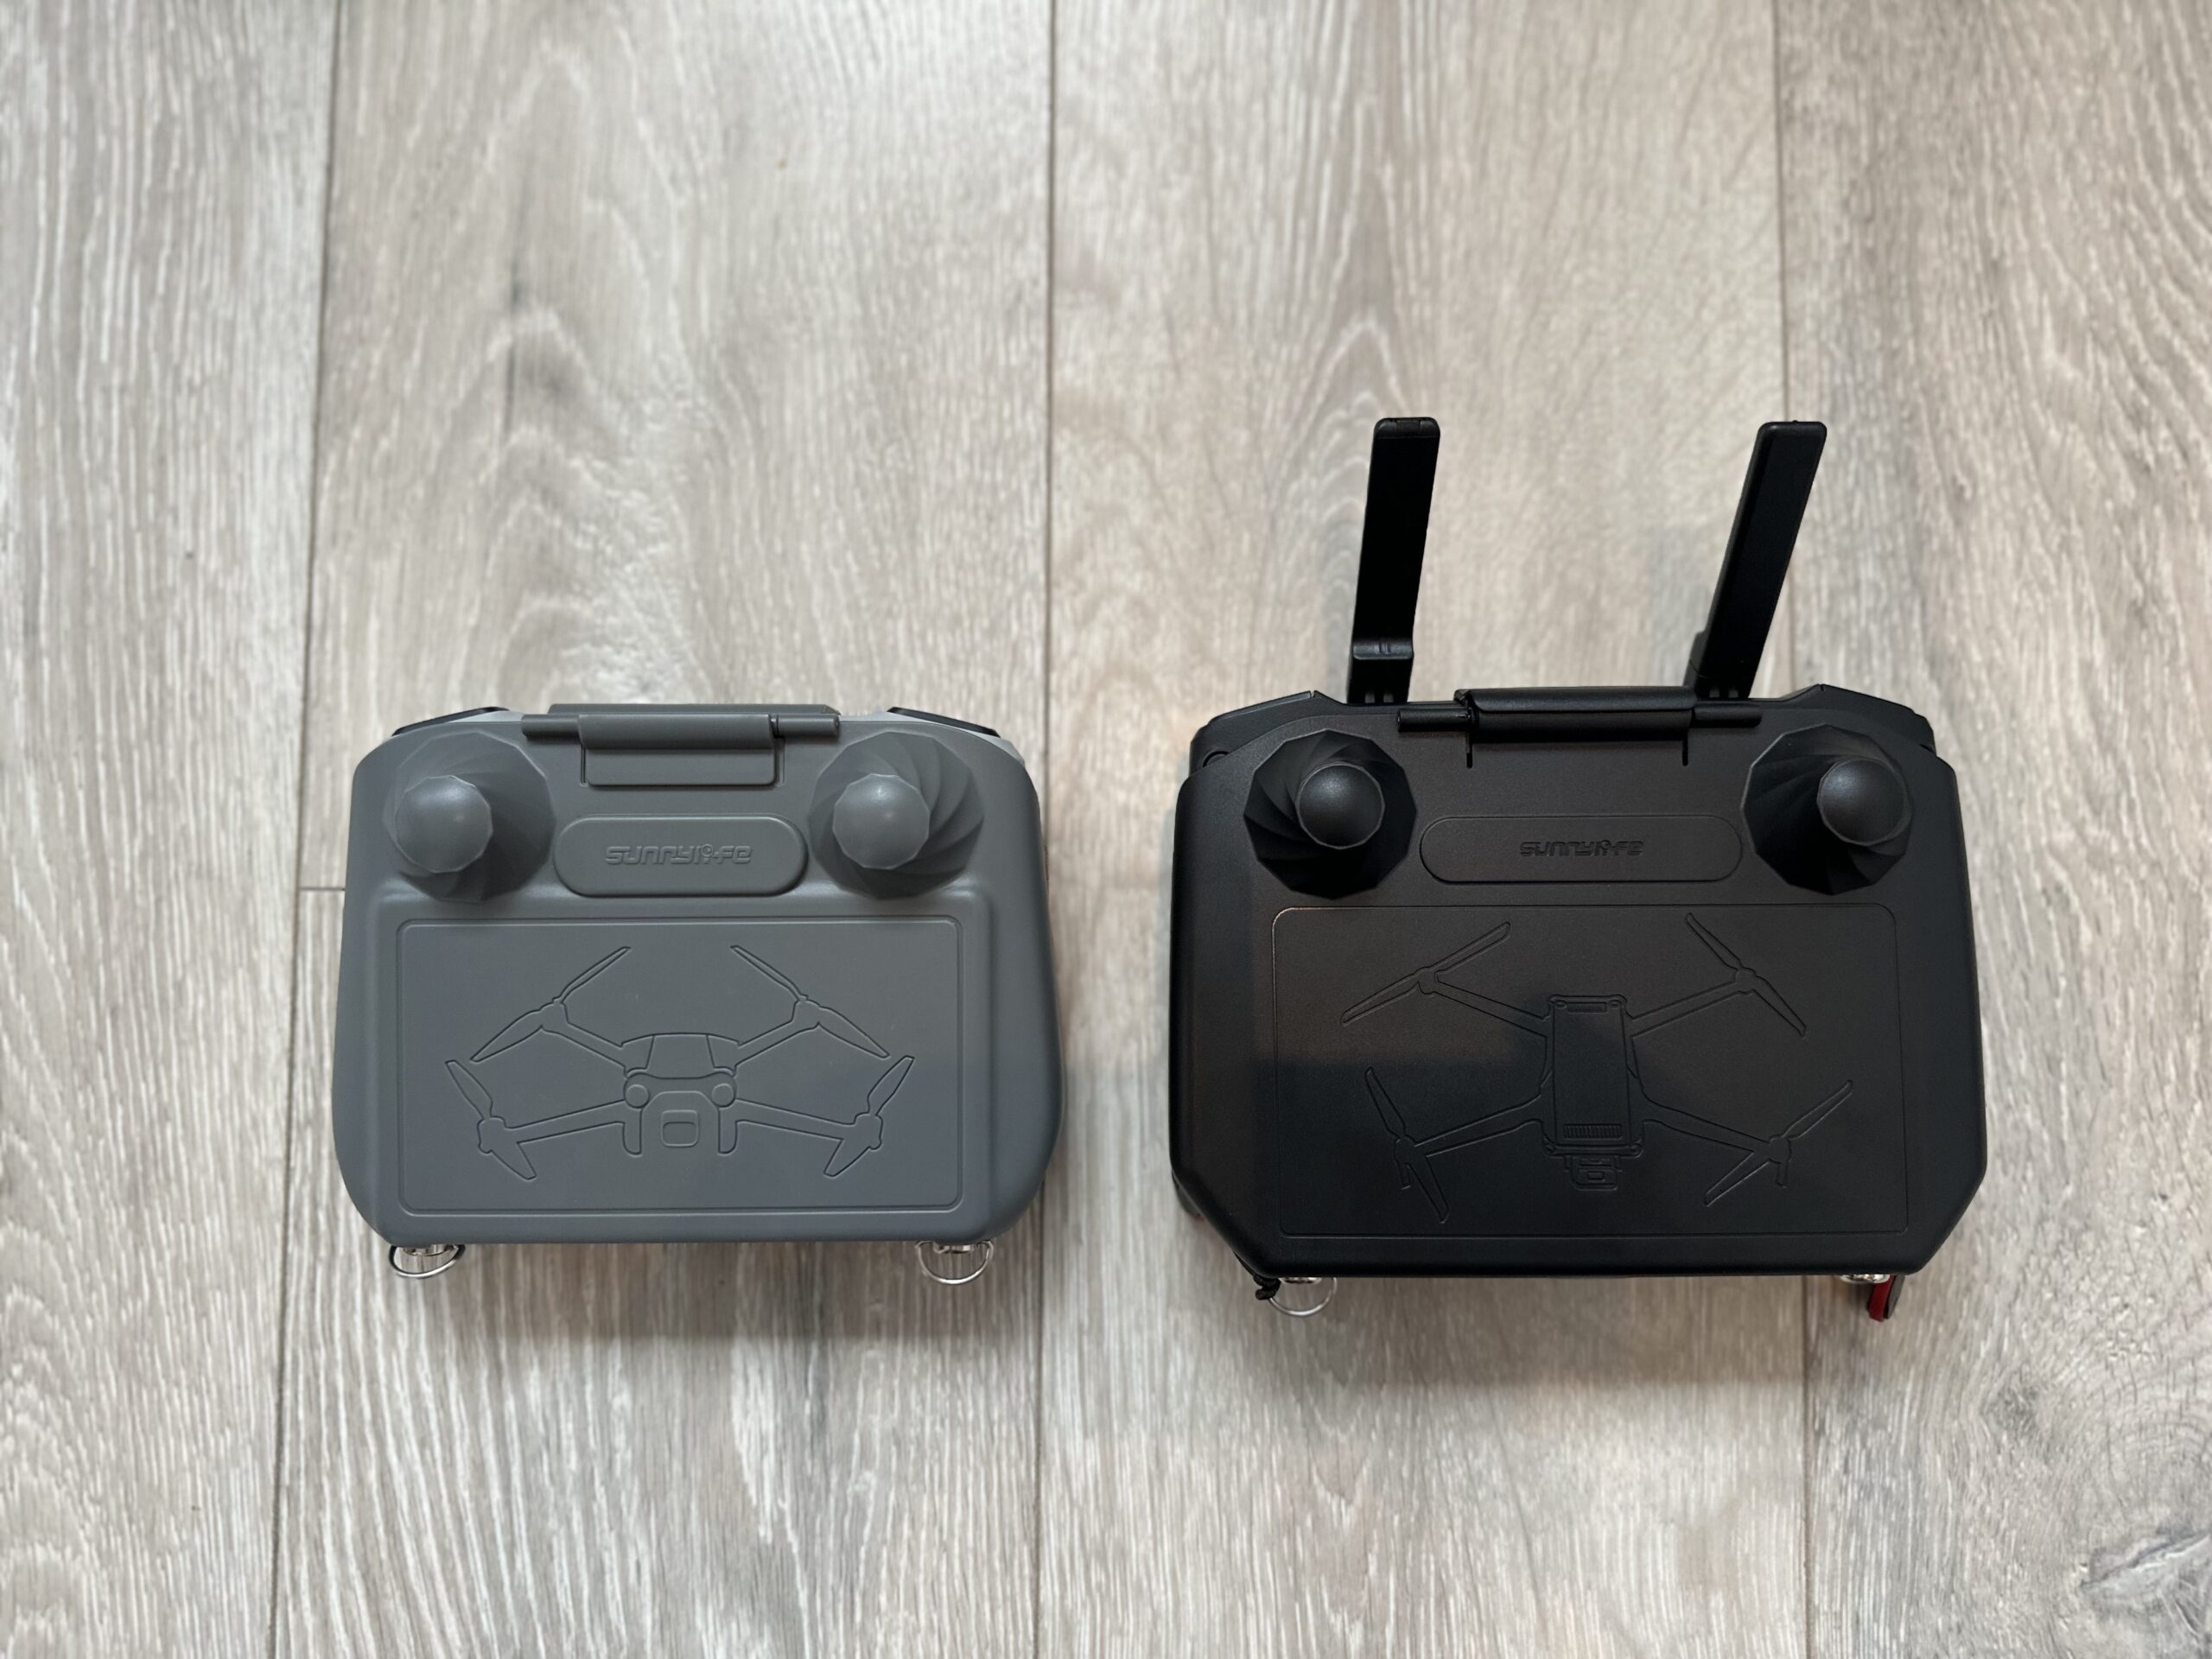 DJI RC Pro vs DJI RC: which is better? - The Drone Girl